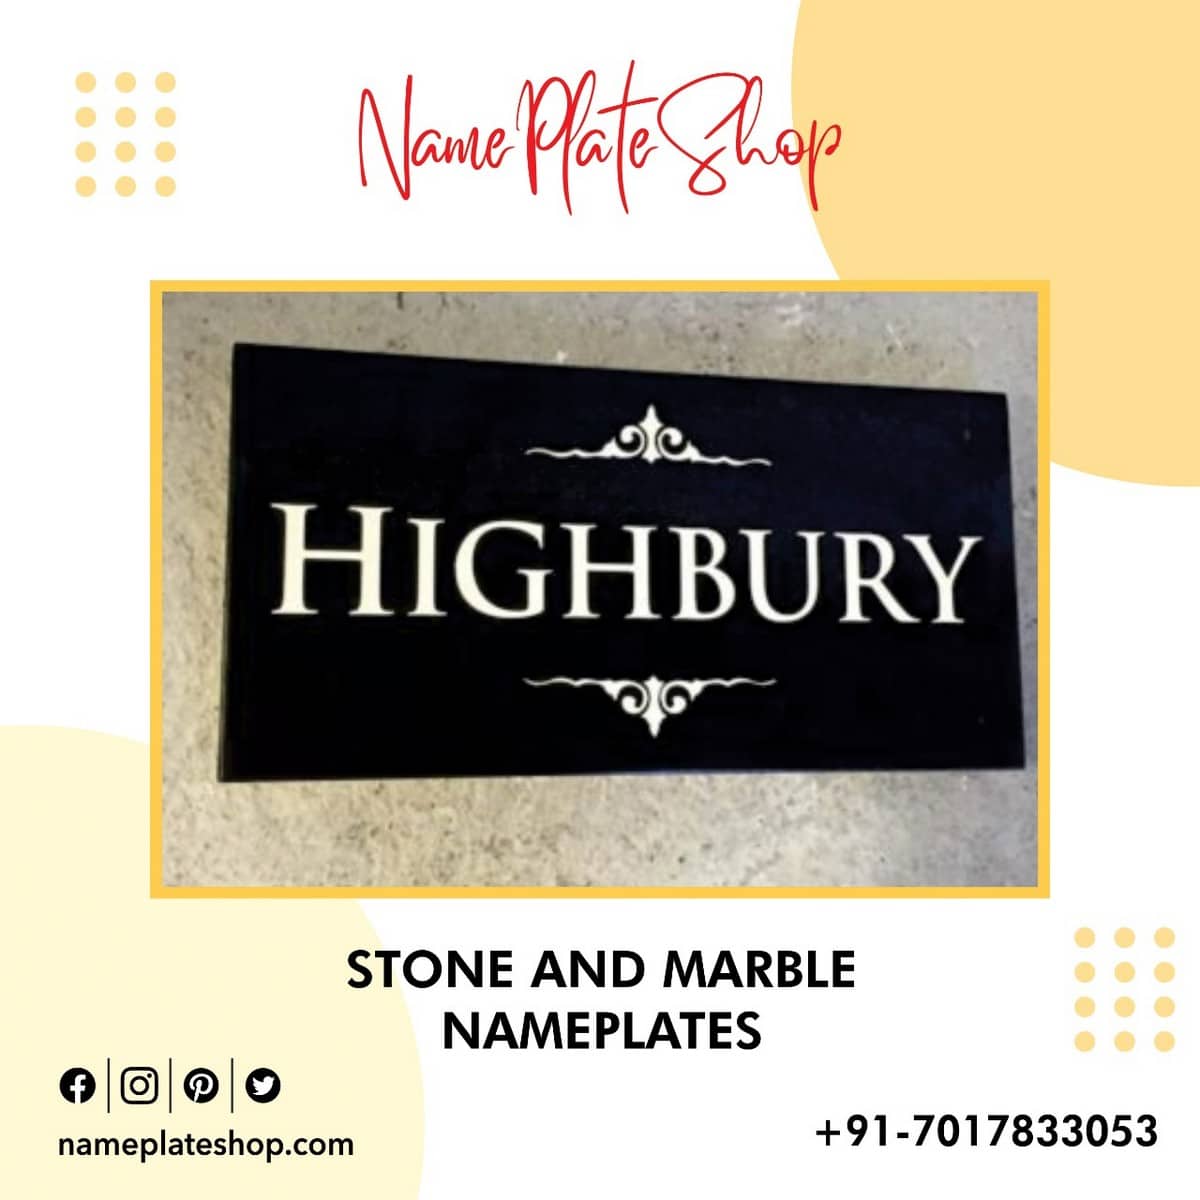 Stone and Marble nameplates